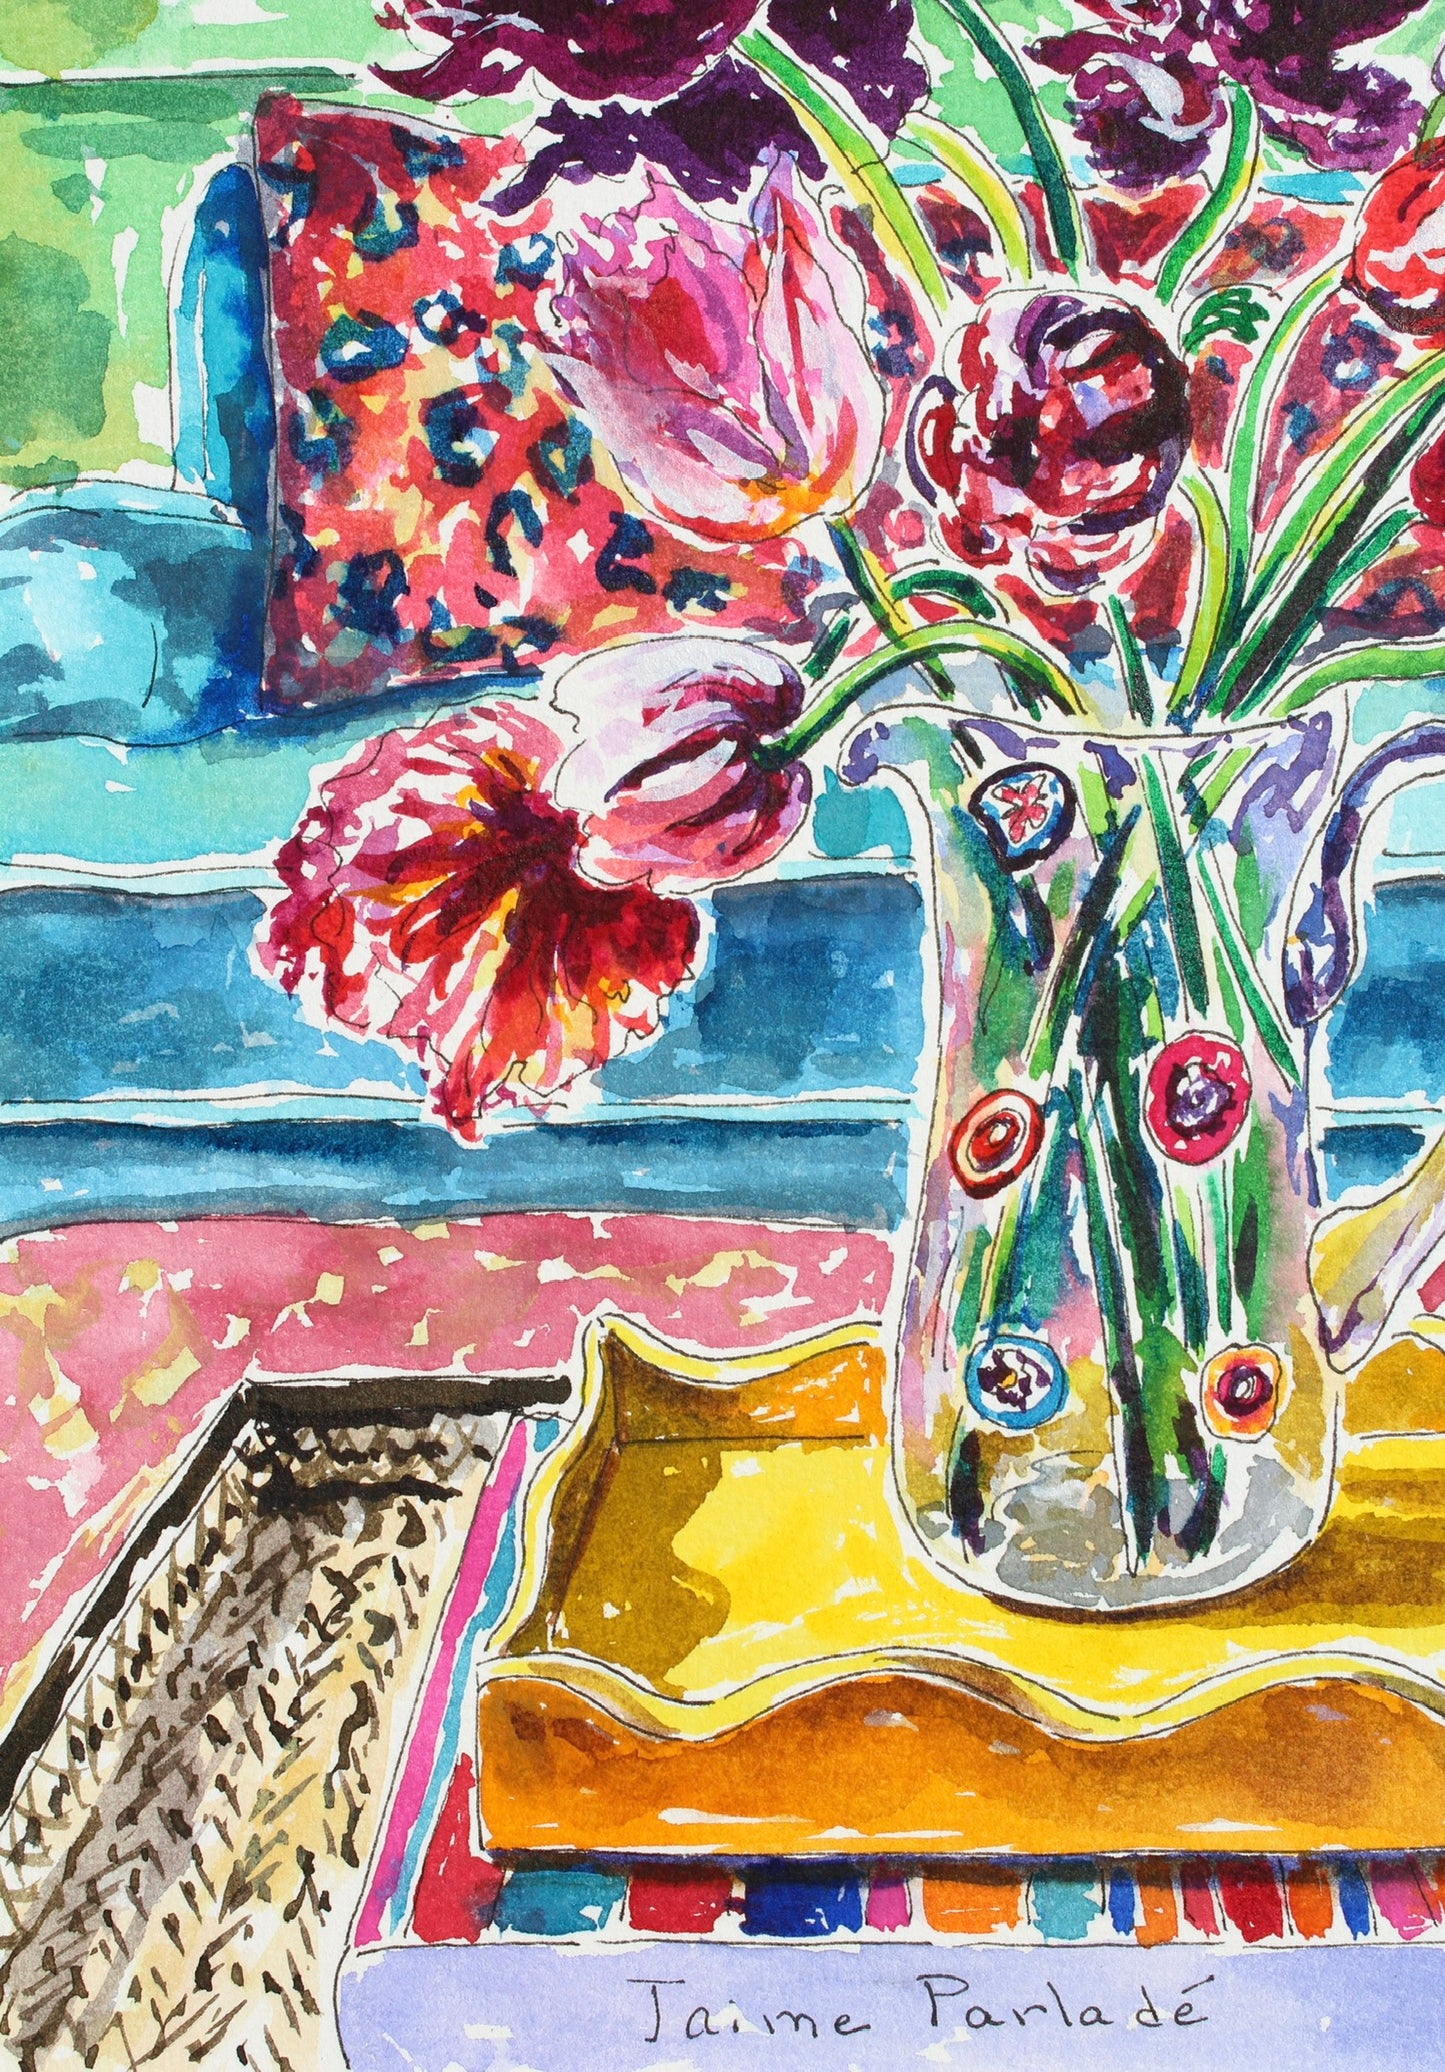 Springtime In London, An Original 12" x 9" Watercolor And Ink Interior Still Life Painting